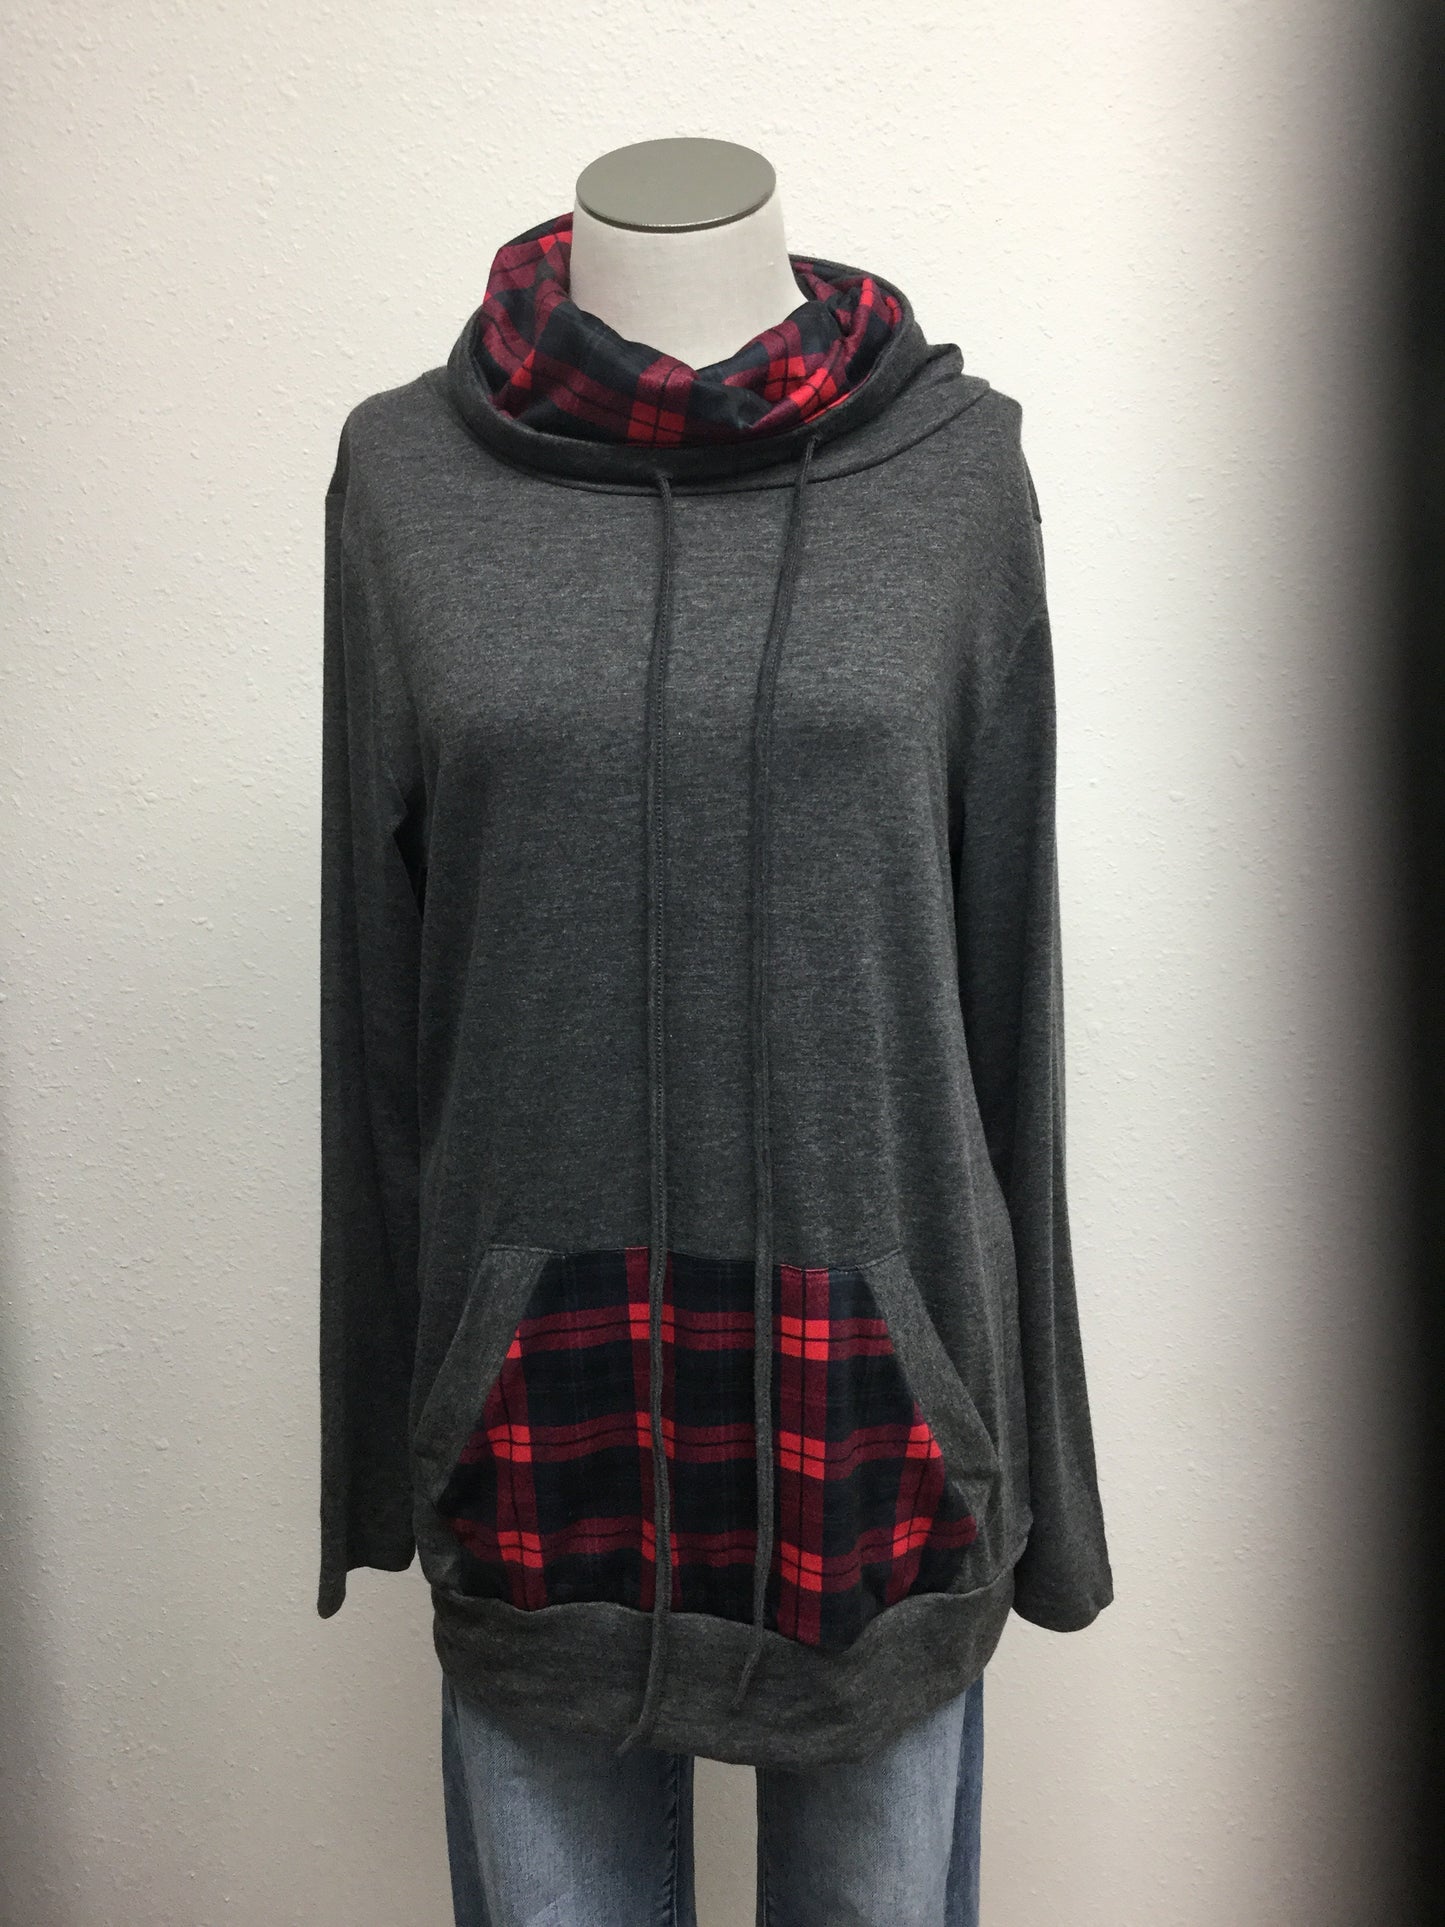 Tunic style top with plaid cowl neck & pocket detail